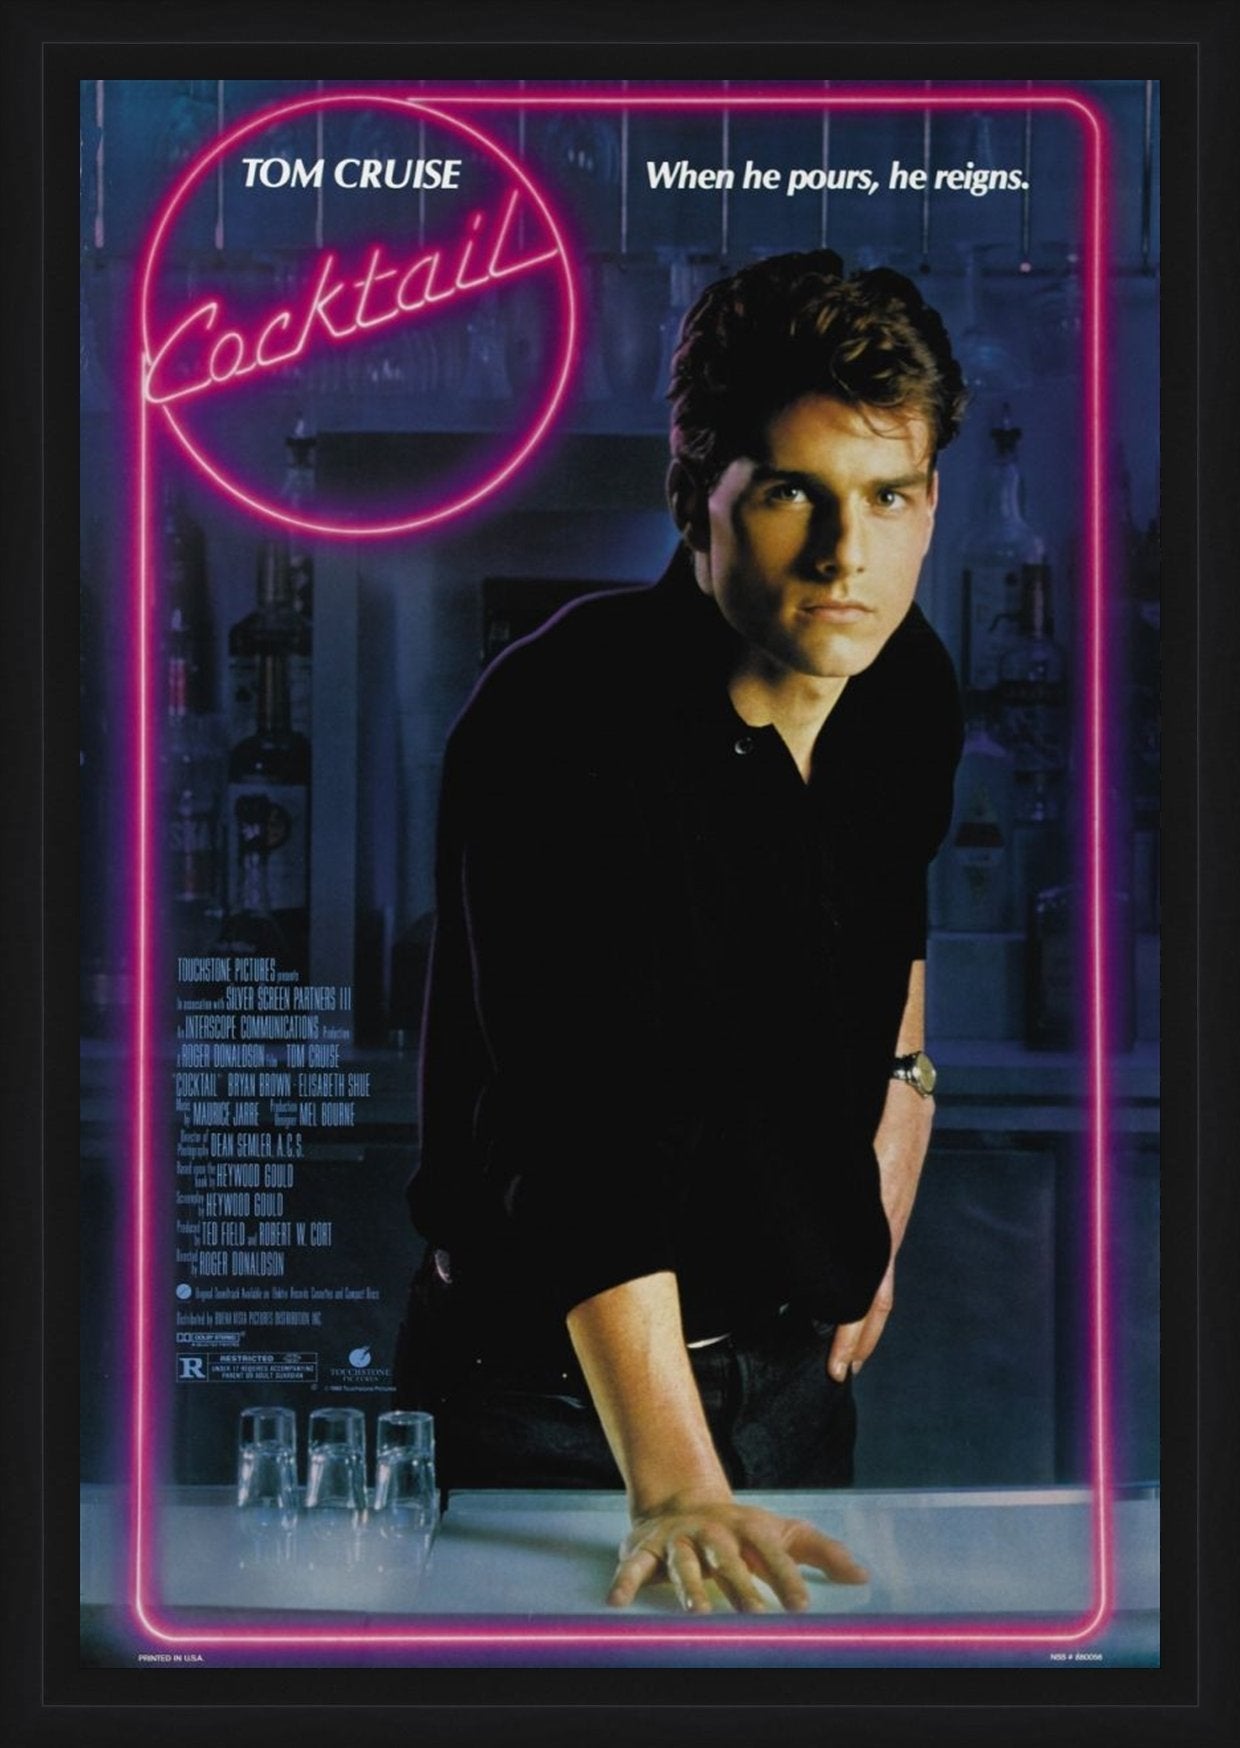 An original movie poster for the film Cocktail